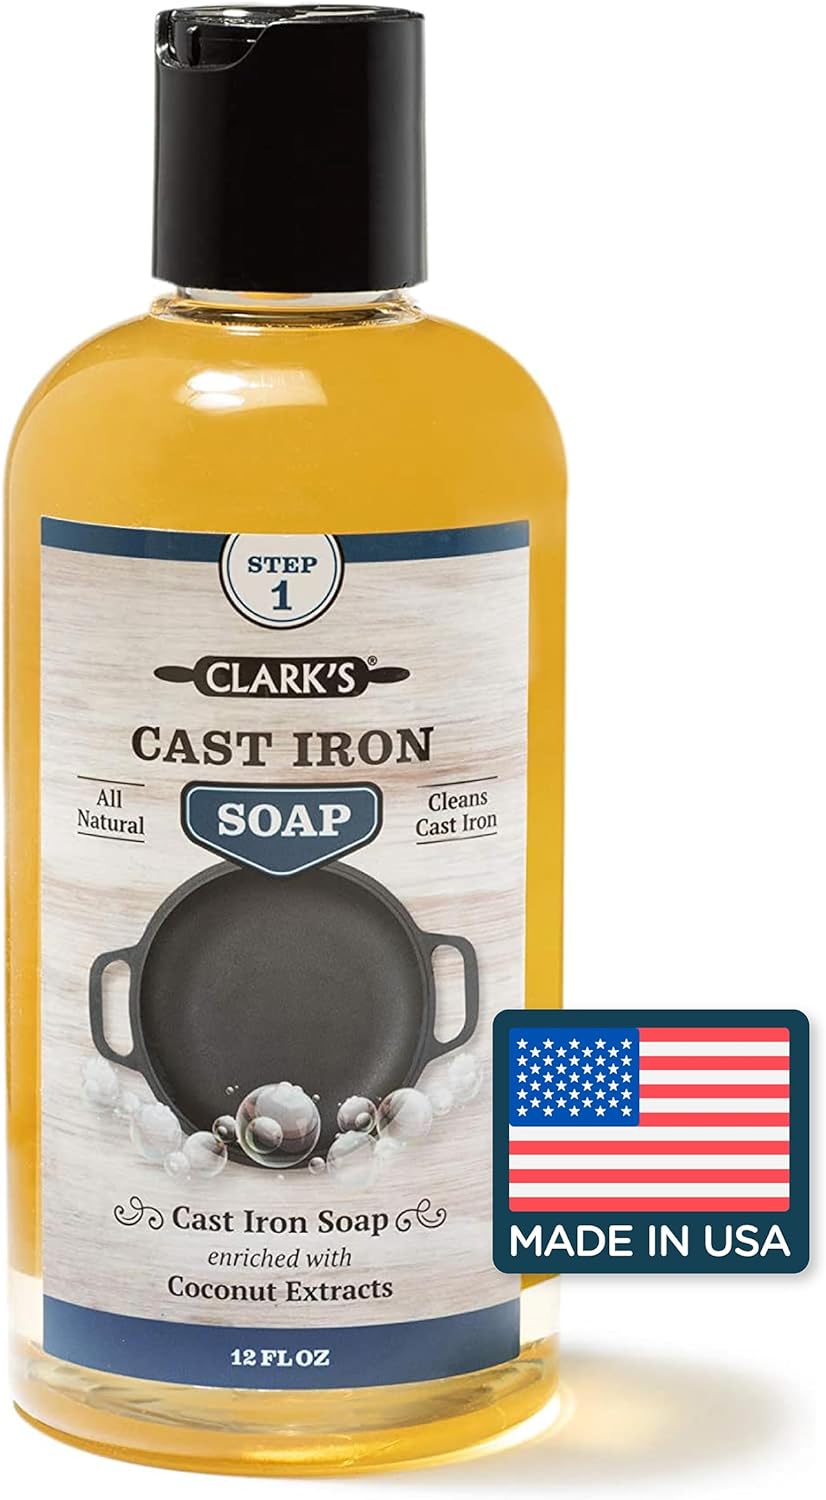 CLARK'S Cast Iron Coconut Soap 12 oz - Plant Based Castile and Refined Coconut Soap for Cast Iron and Carbon Steel Cookware - Vegan Friendly - No Mineral Oil to Prevent Rust from Cleaning Cast Iron